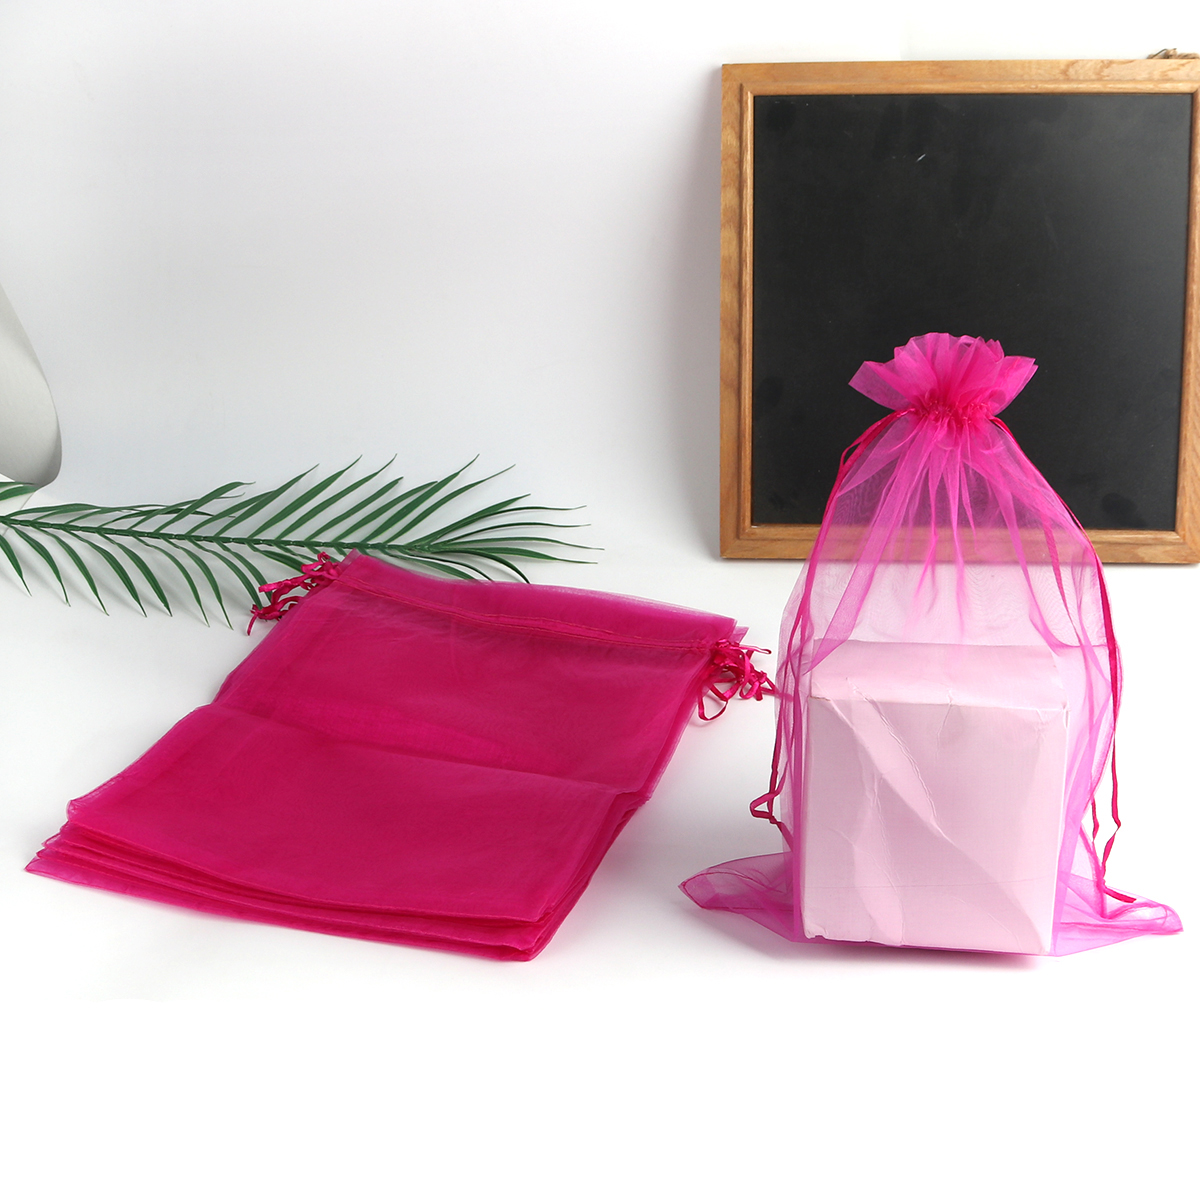 Picture of Wedding Gift Organza Drawstring Bags Rectangle Fuchsia (Usable Space: 26x20cm) 30cm x 20cm, 10 PCs